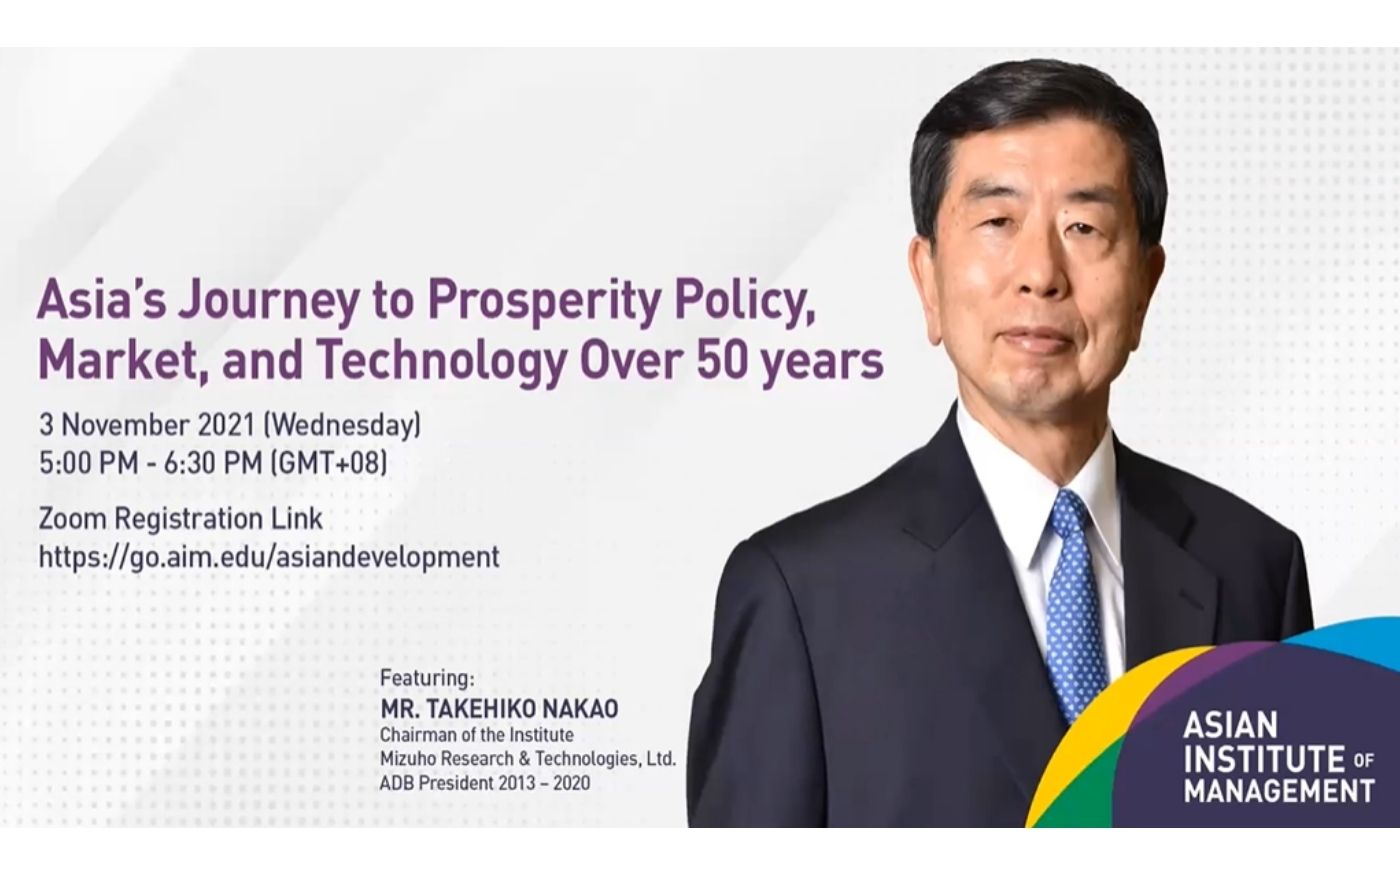 Chairman Takehiko Nakao’s Webinar on Asia’s Journey to Prosperity Policy, Market, and Technology Over 50 Years